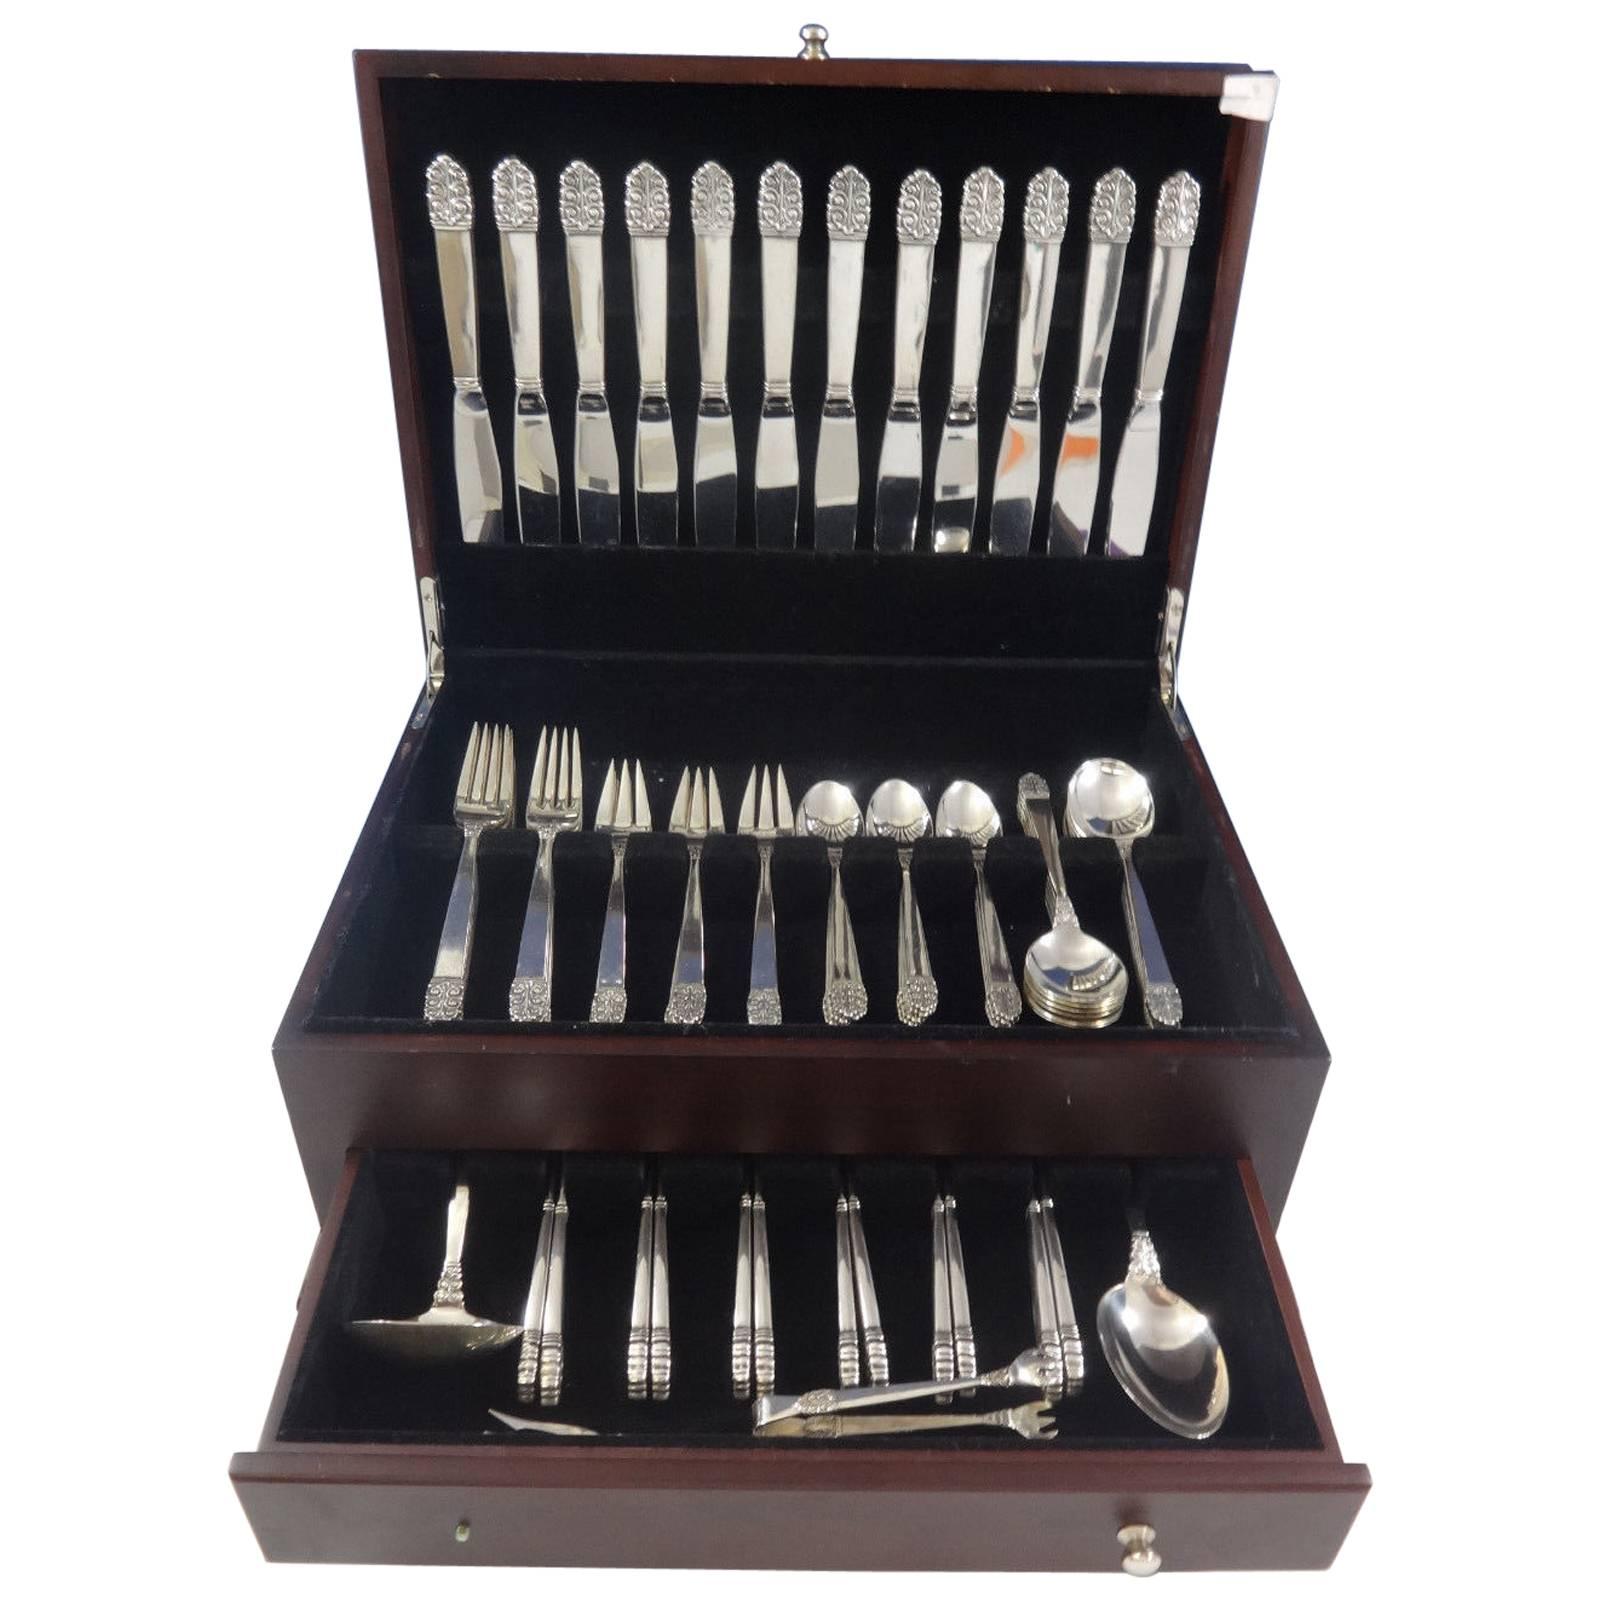 Gorgeous Mid-Century Modern Northern Lights by International sterling silver flatware set of 77 pieces. This set includes: 12 knives, 8 7/8